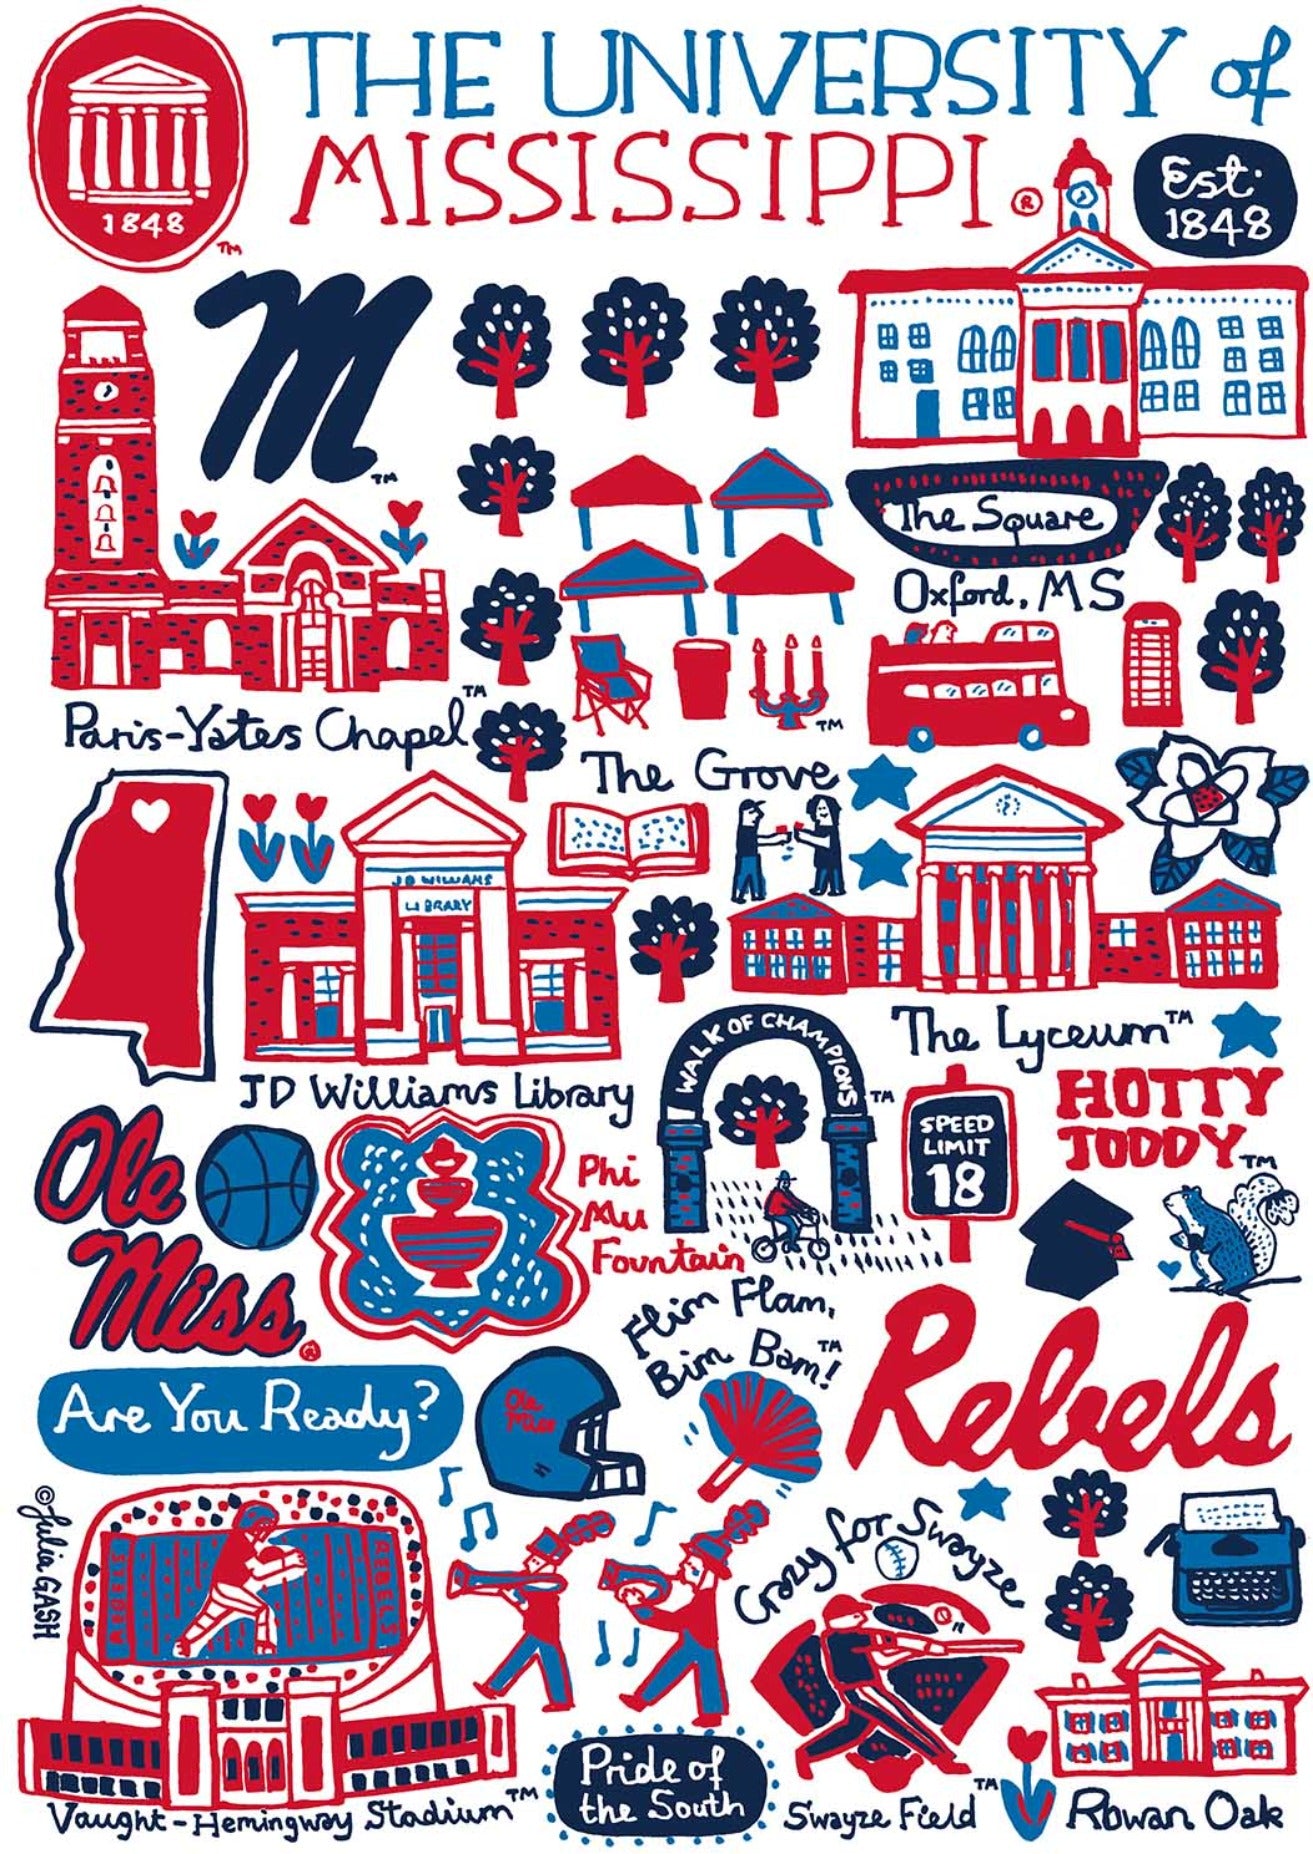 The University of Mississippi by Julia Gash